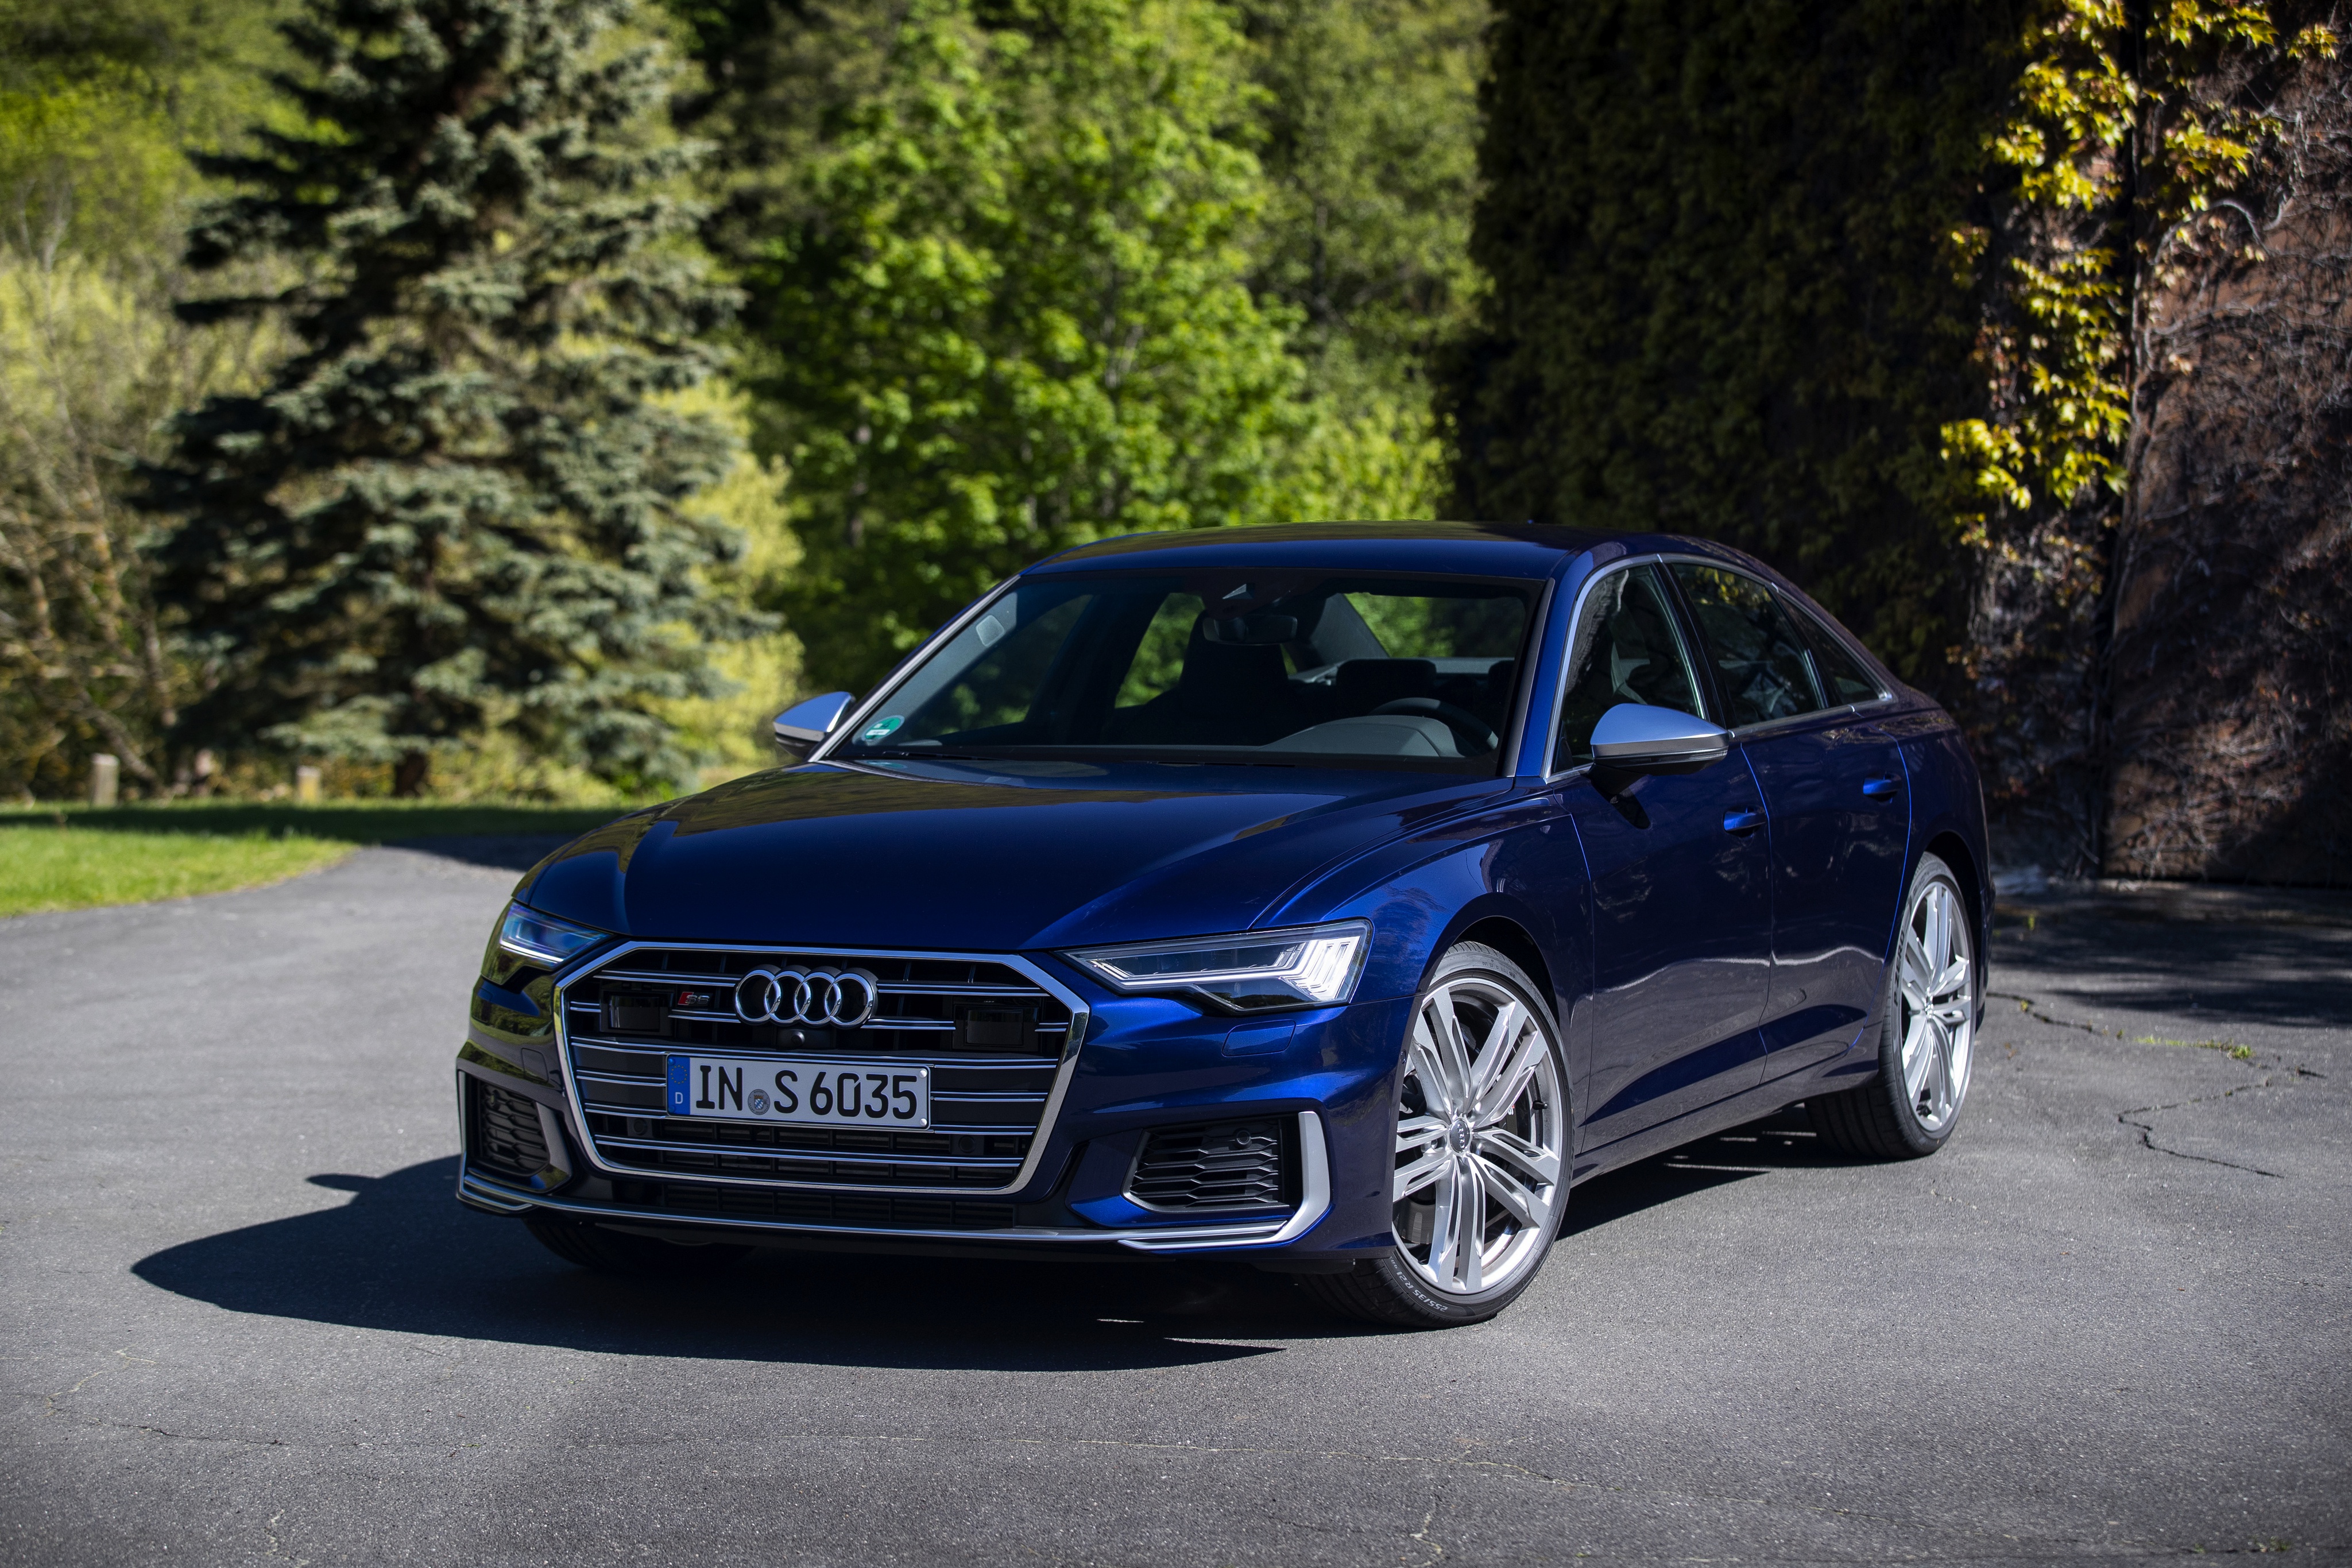 Audi A6 Wallpapers - Top 35 Best Audi A6 Backgrounds